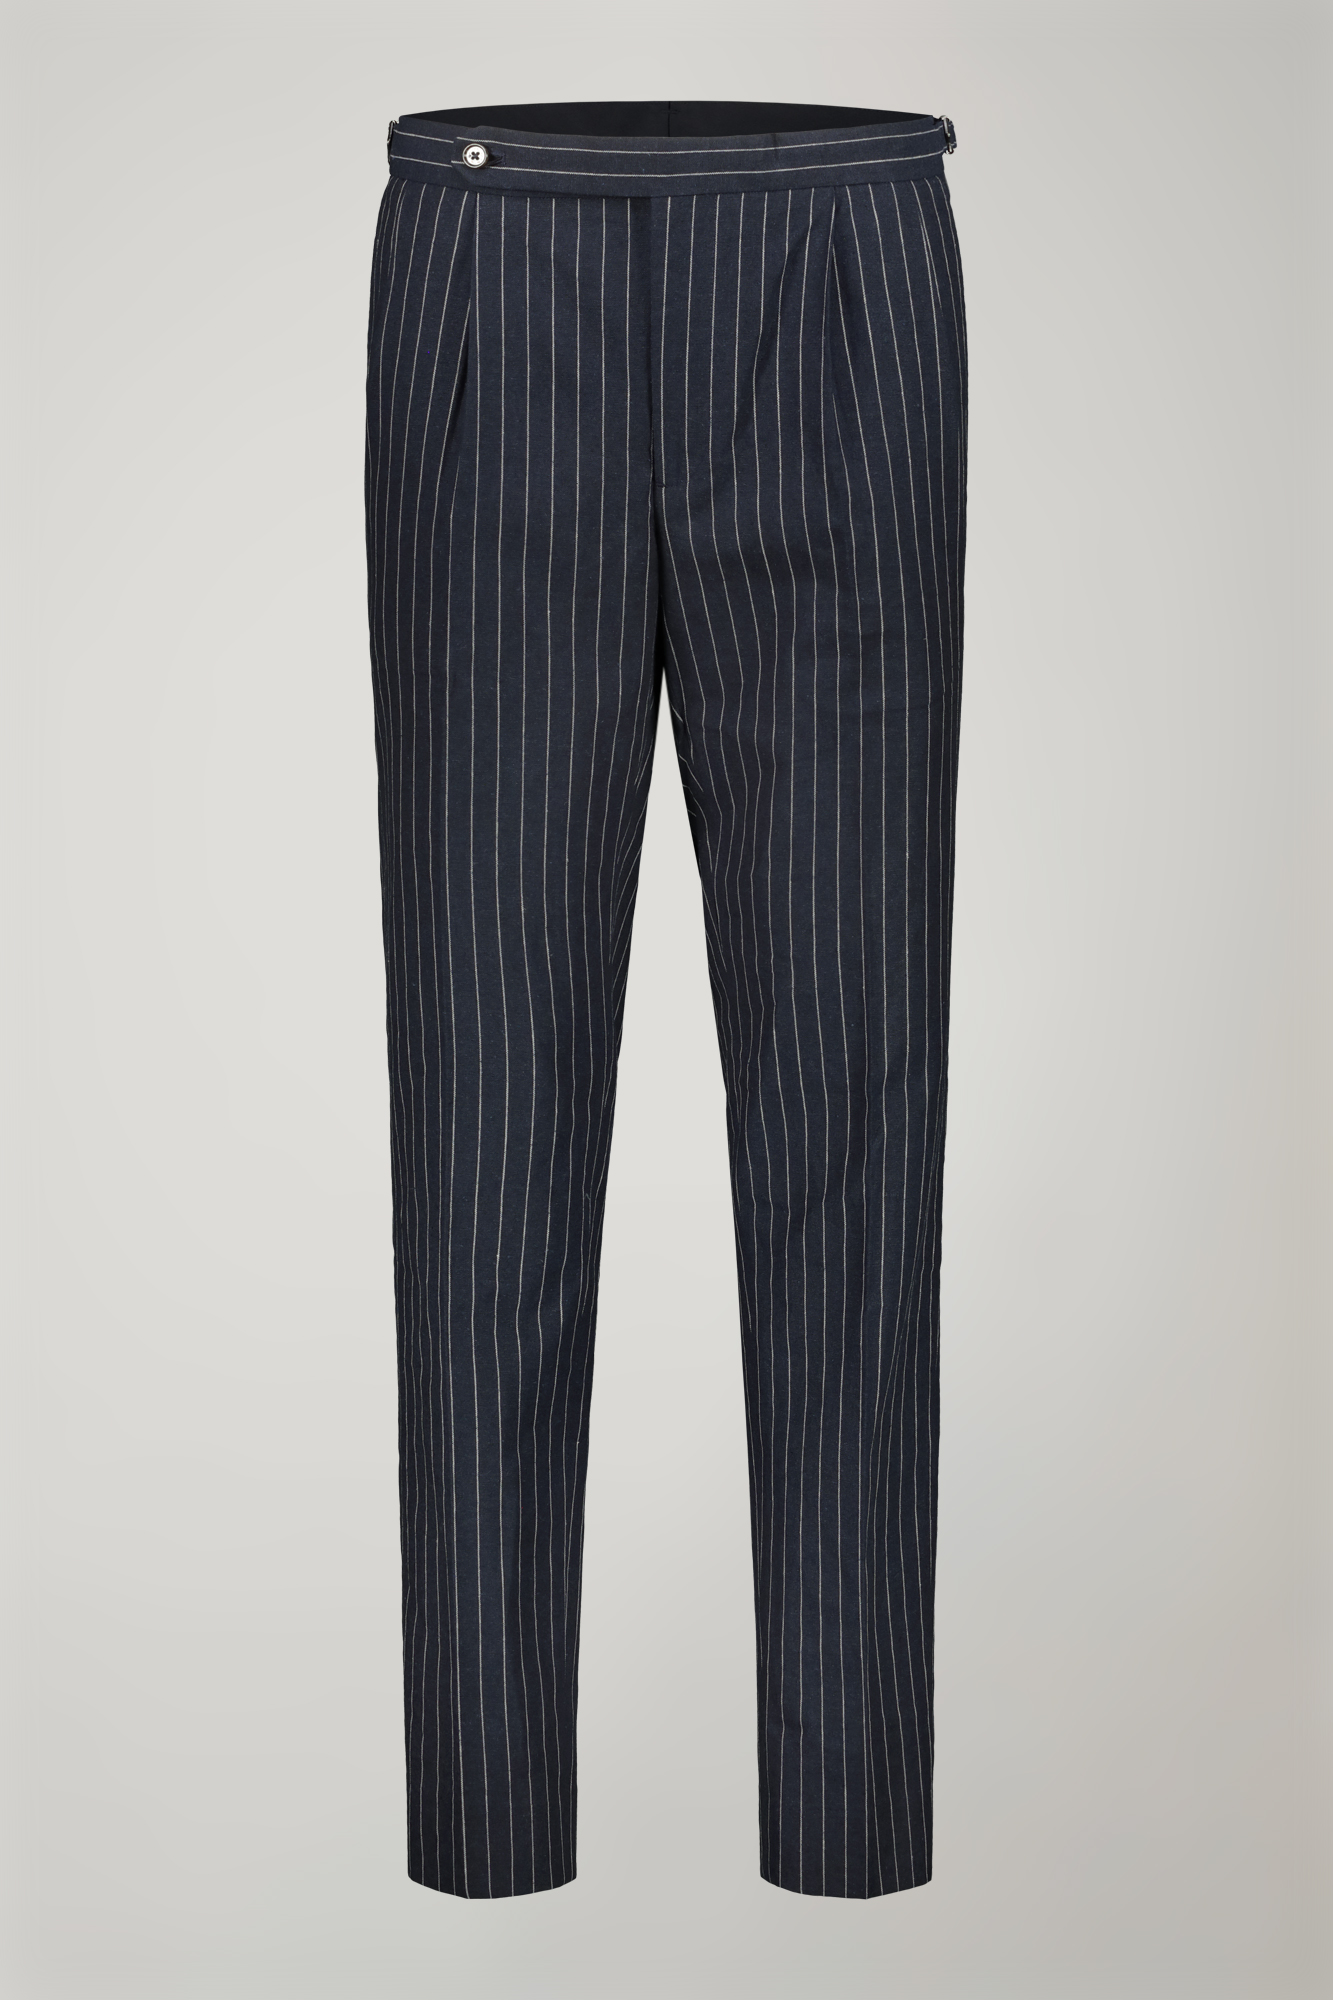 Men's classic double pinces trousers linen and cotton fabric with regular fit pinstripe design image number null